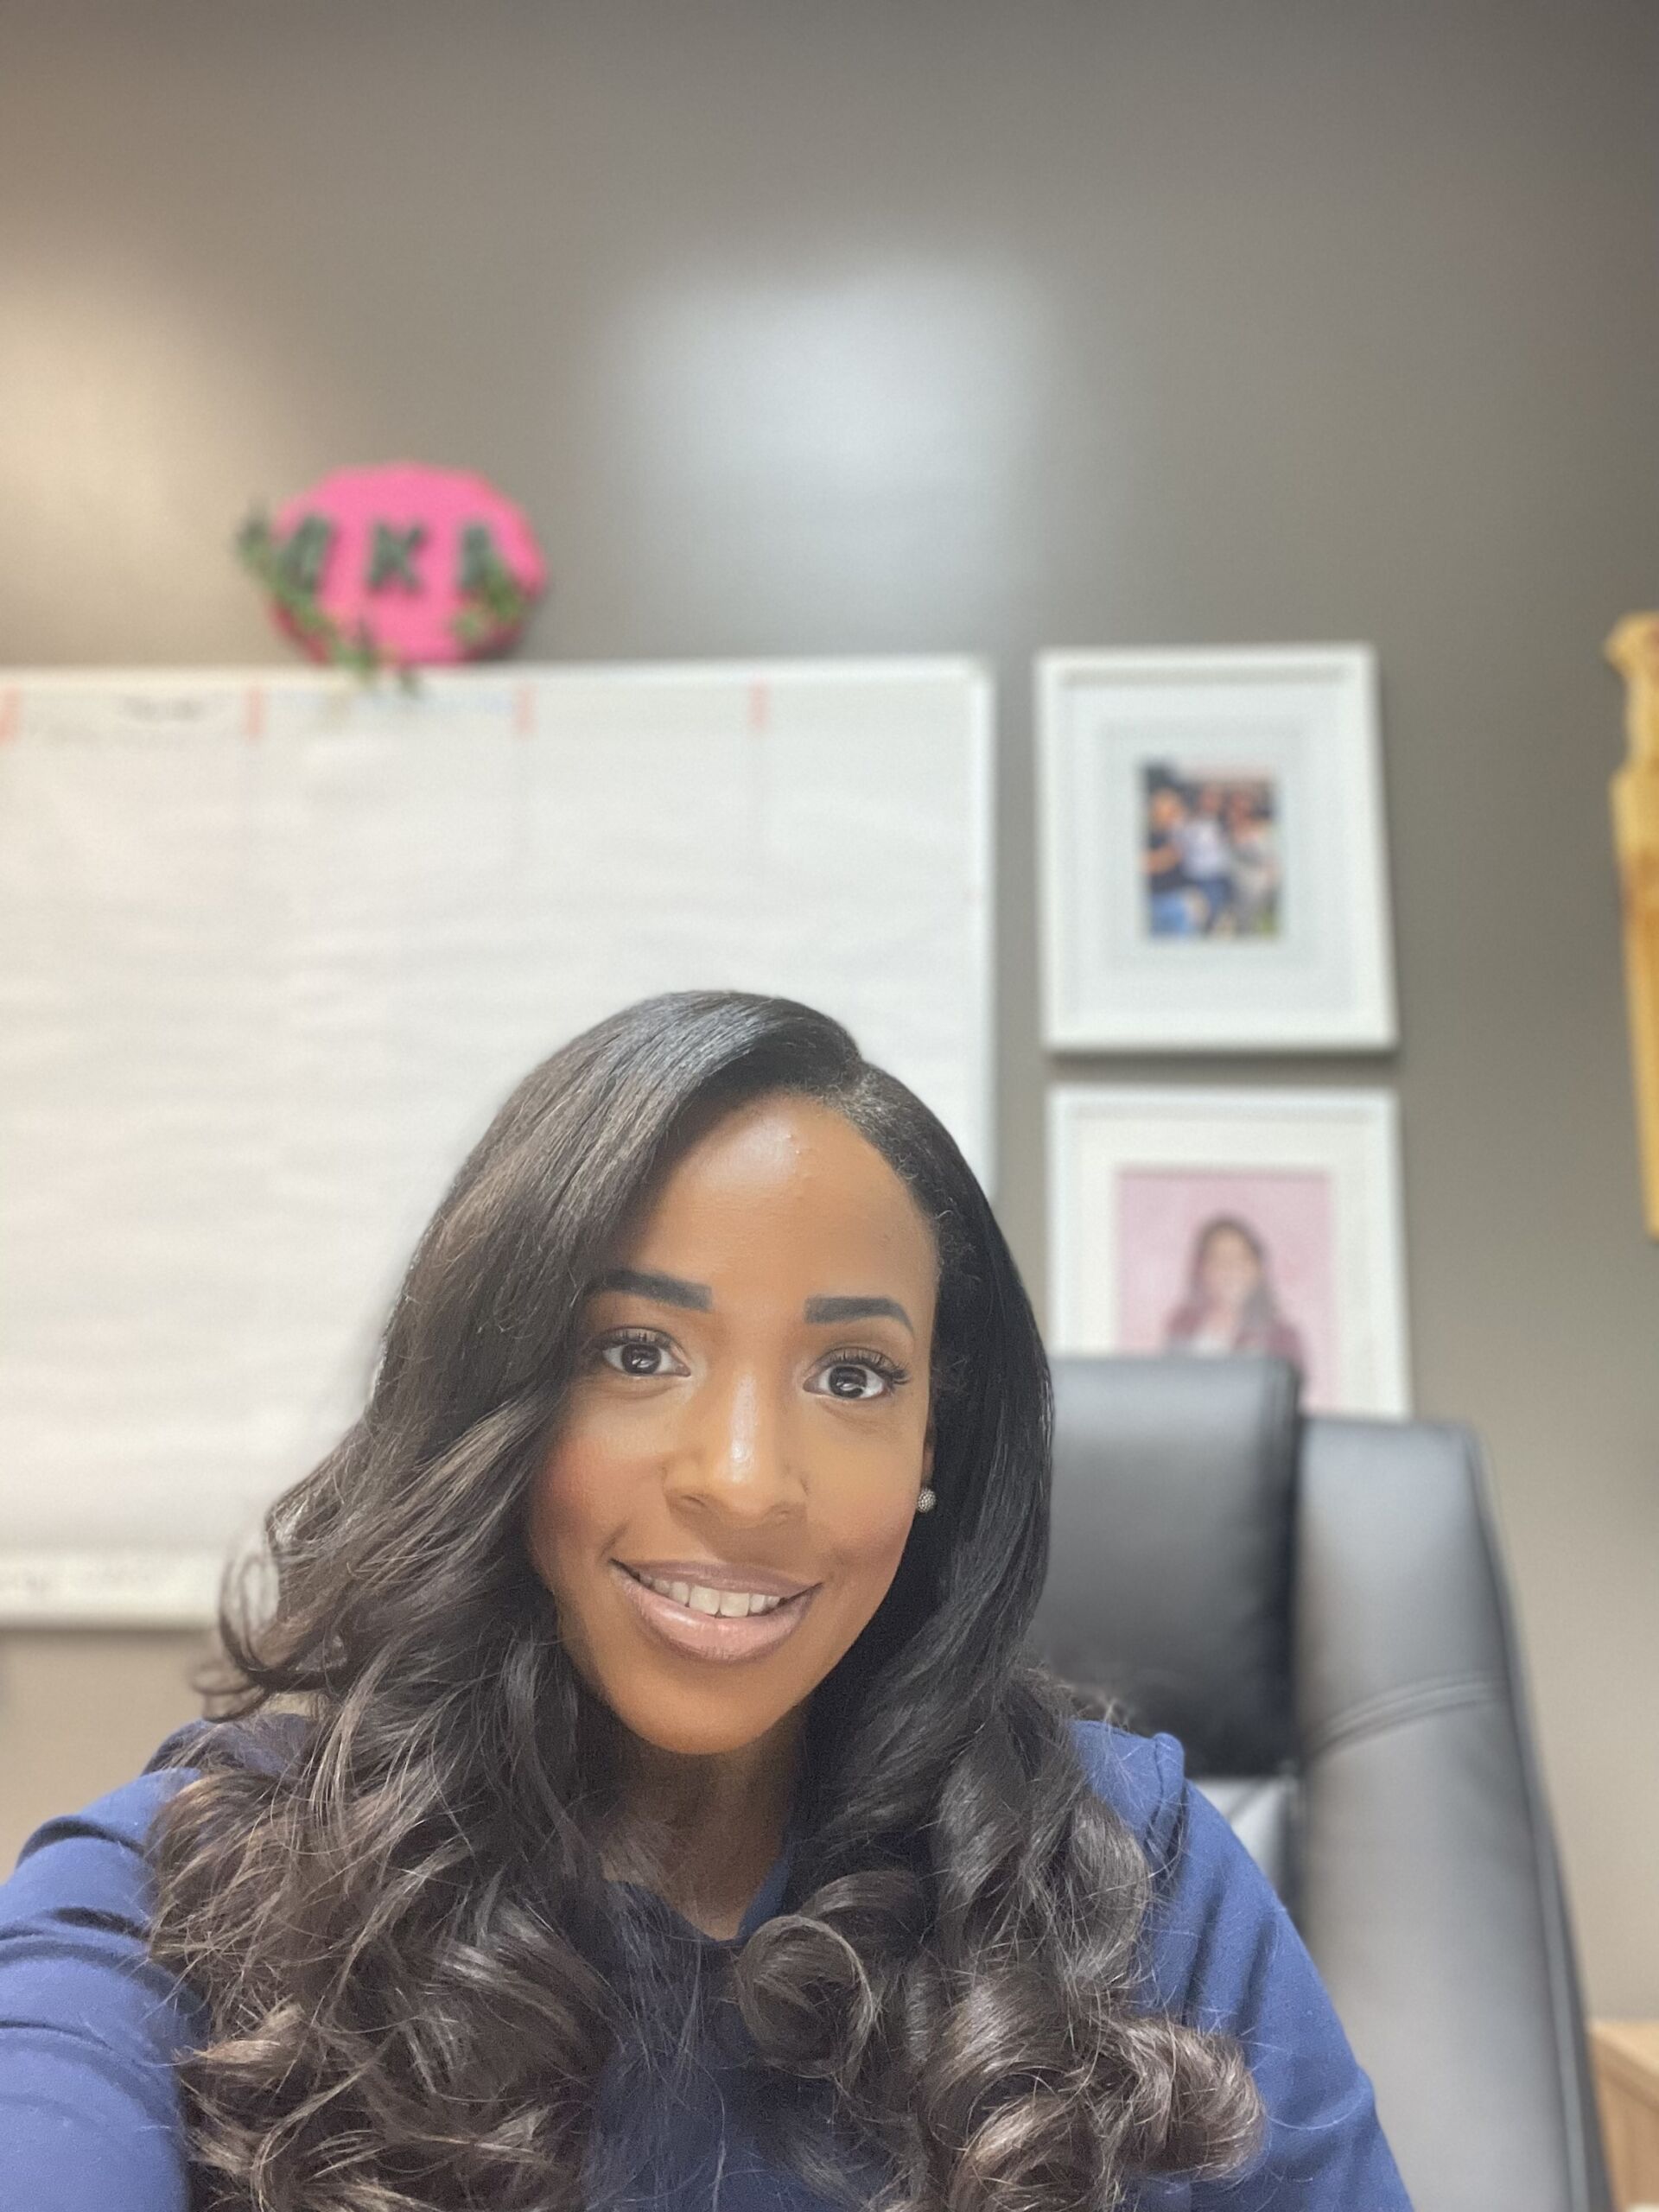 Photo shows a selfie of Principal Miracle Moss in her office at Rowe-Clark Math and Science Academy. She is smiling at the camera as she sits in her office chair. Her hair is in loose curls and she is wearing a dark blue blouse.